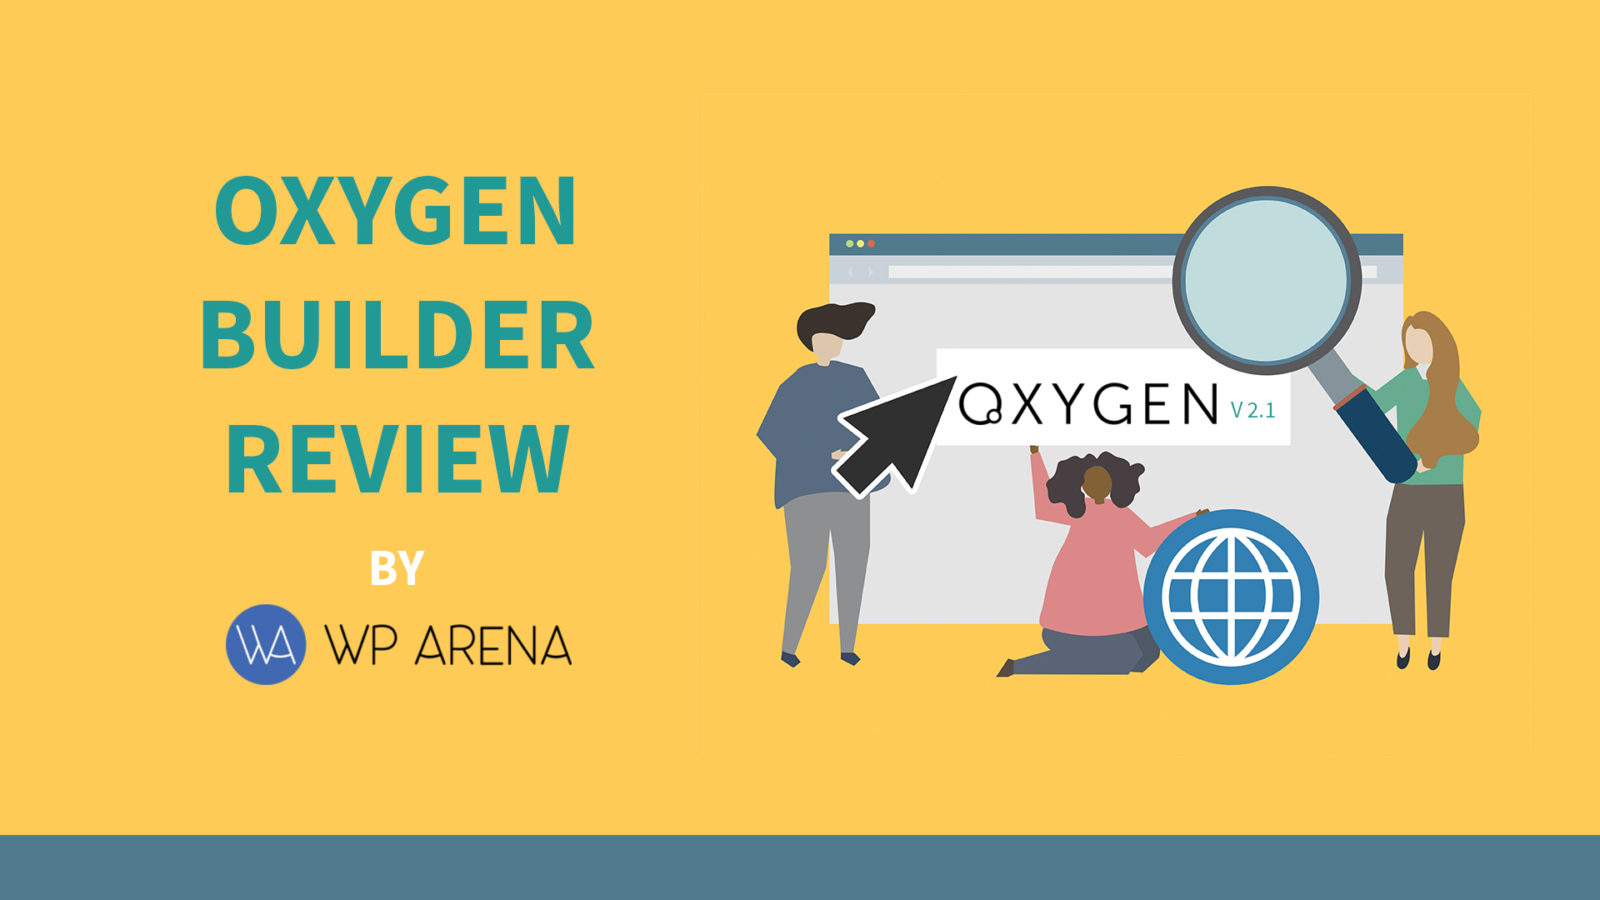 Oxygen Builder 2.1 Review: A Powerful and Flexible Website Builder